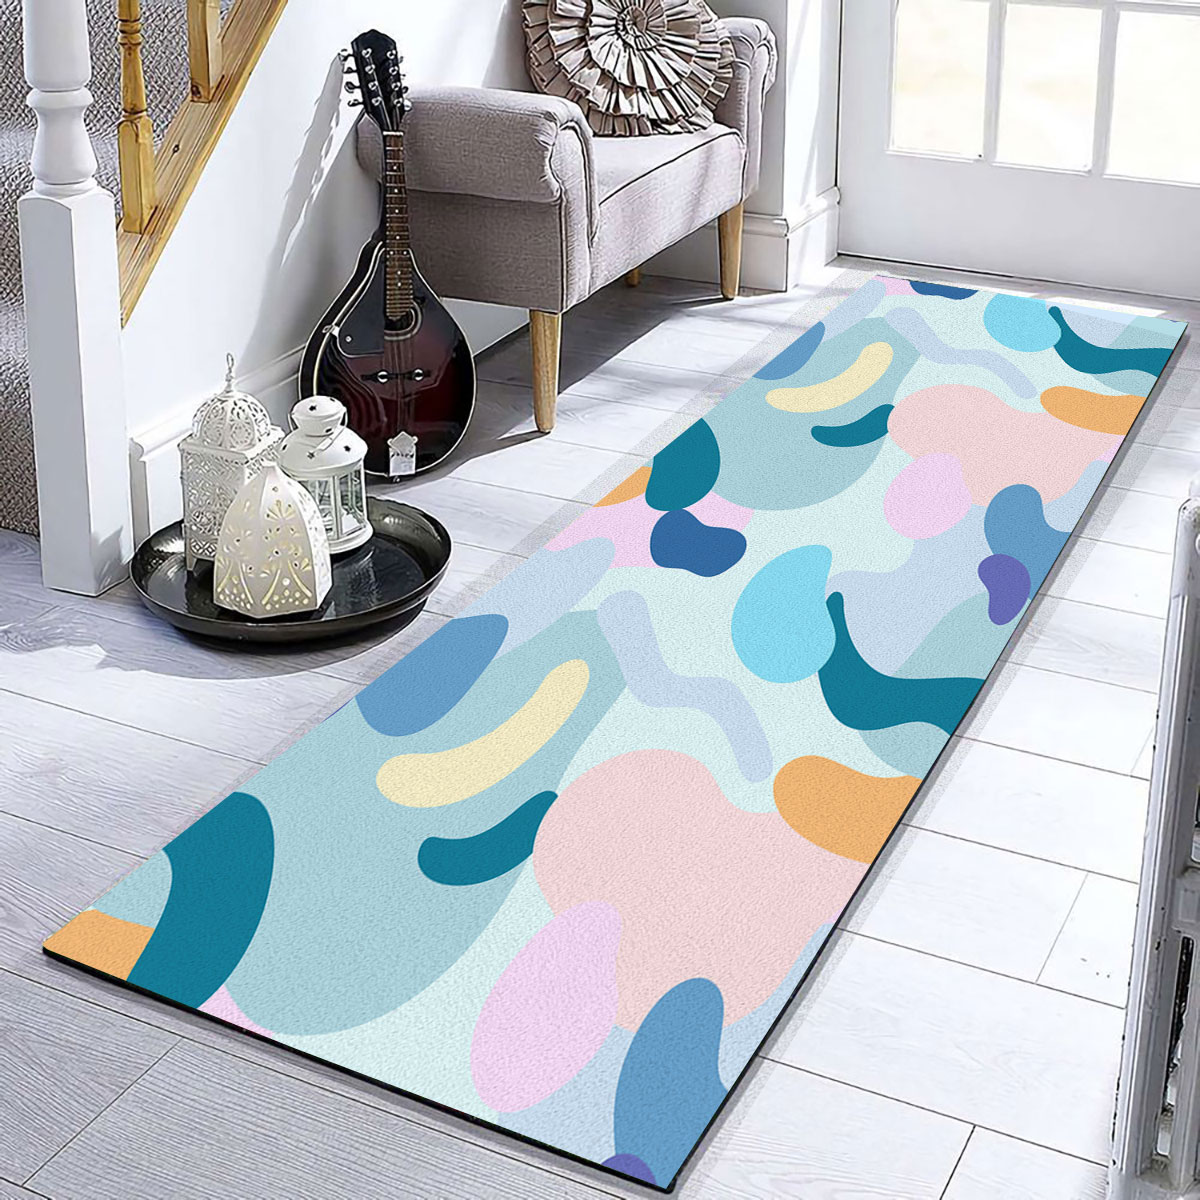 Colorful Abstract Minimalist Runner Carpet